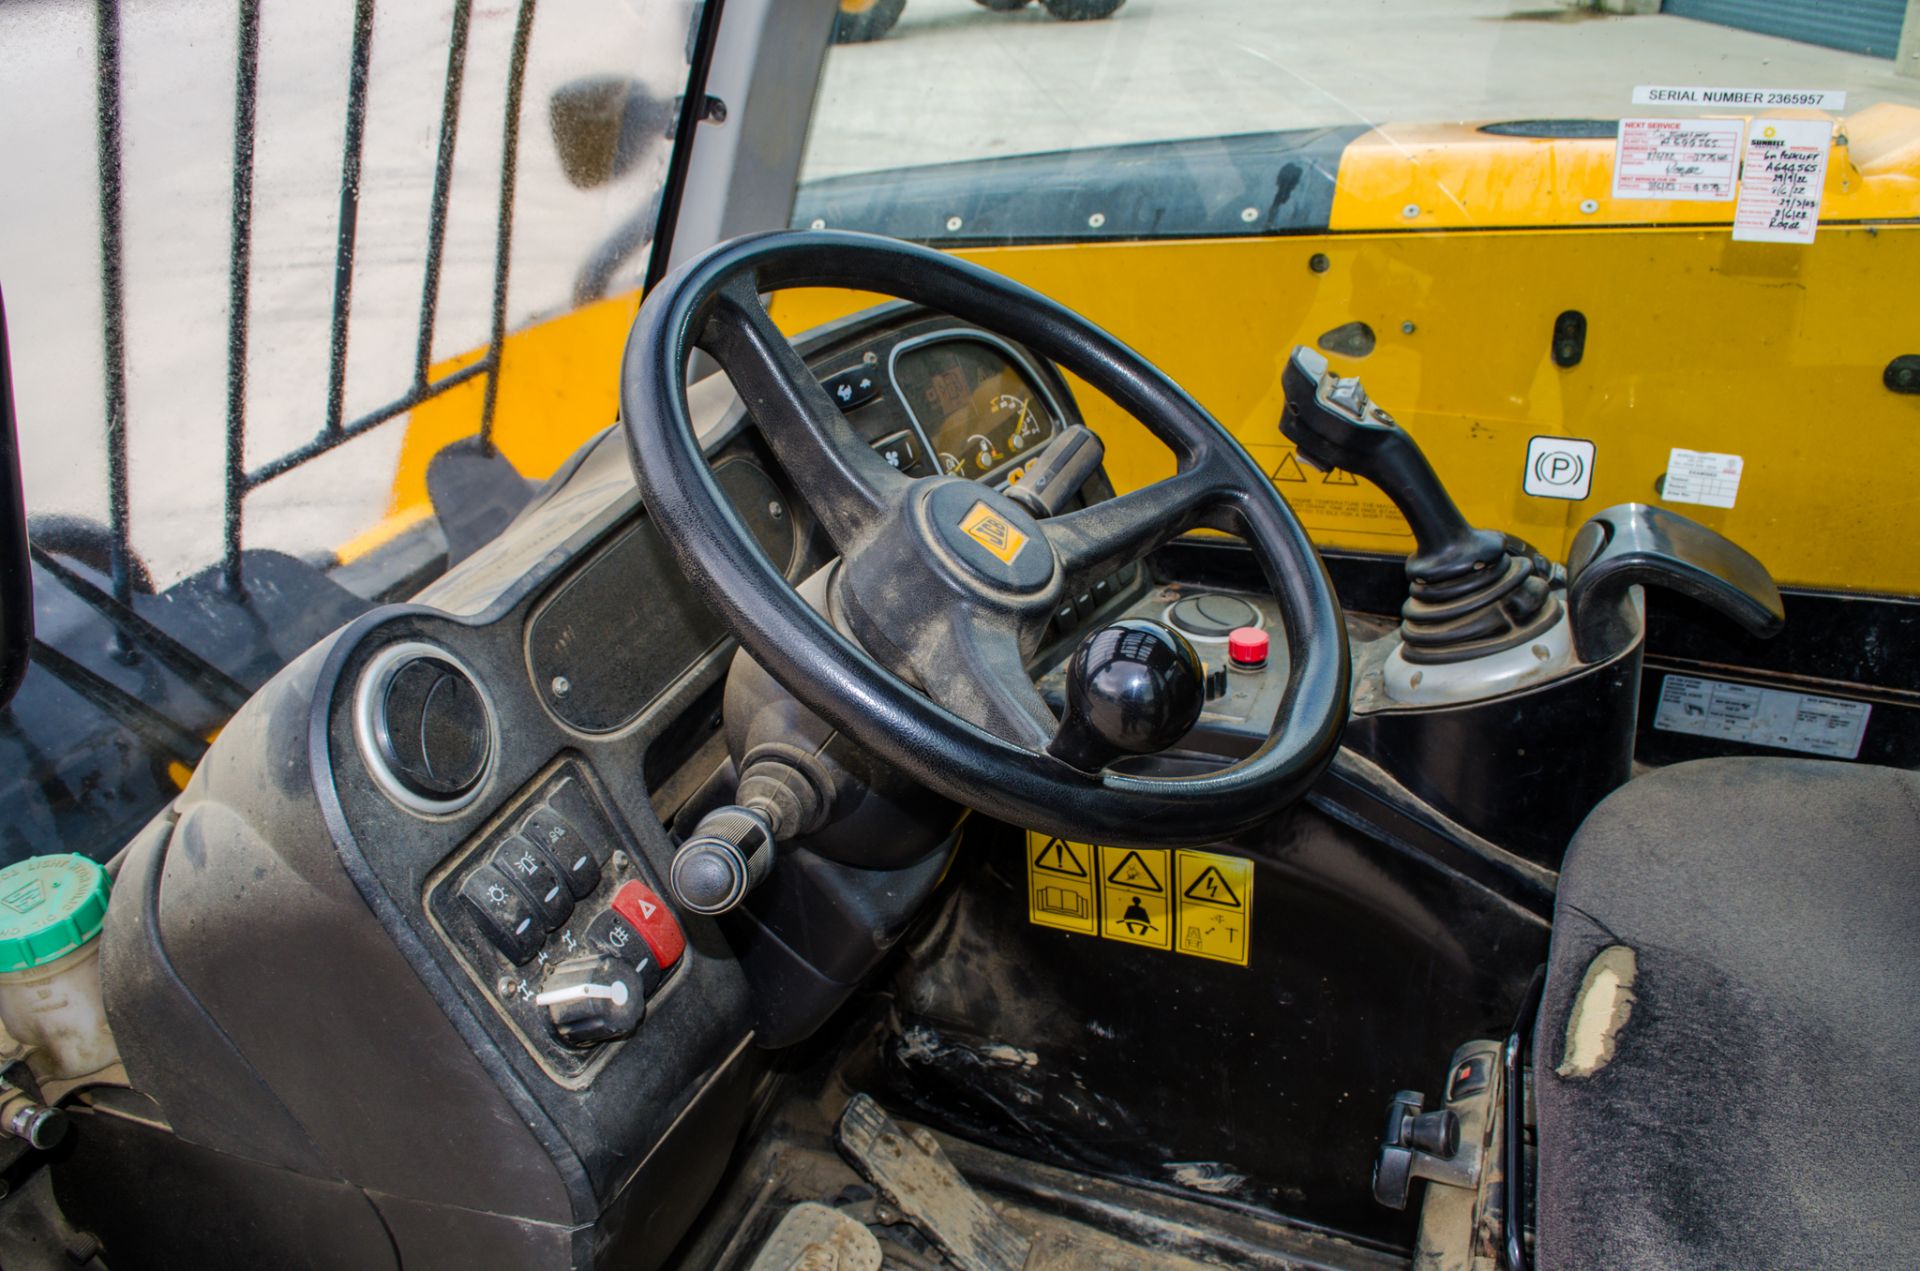 JCB 525-60 6 metre telescopic handler Year: 2015 S/N: 2365957 Recorded Hours: 4207 A644565 - Image 19 of 21